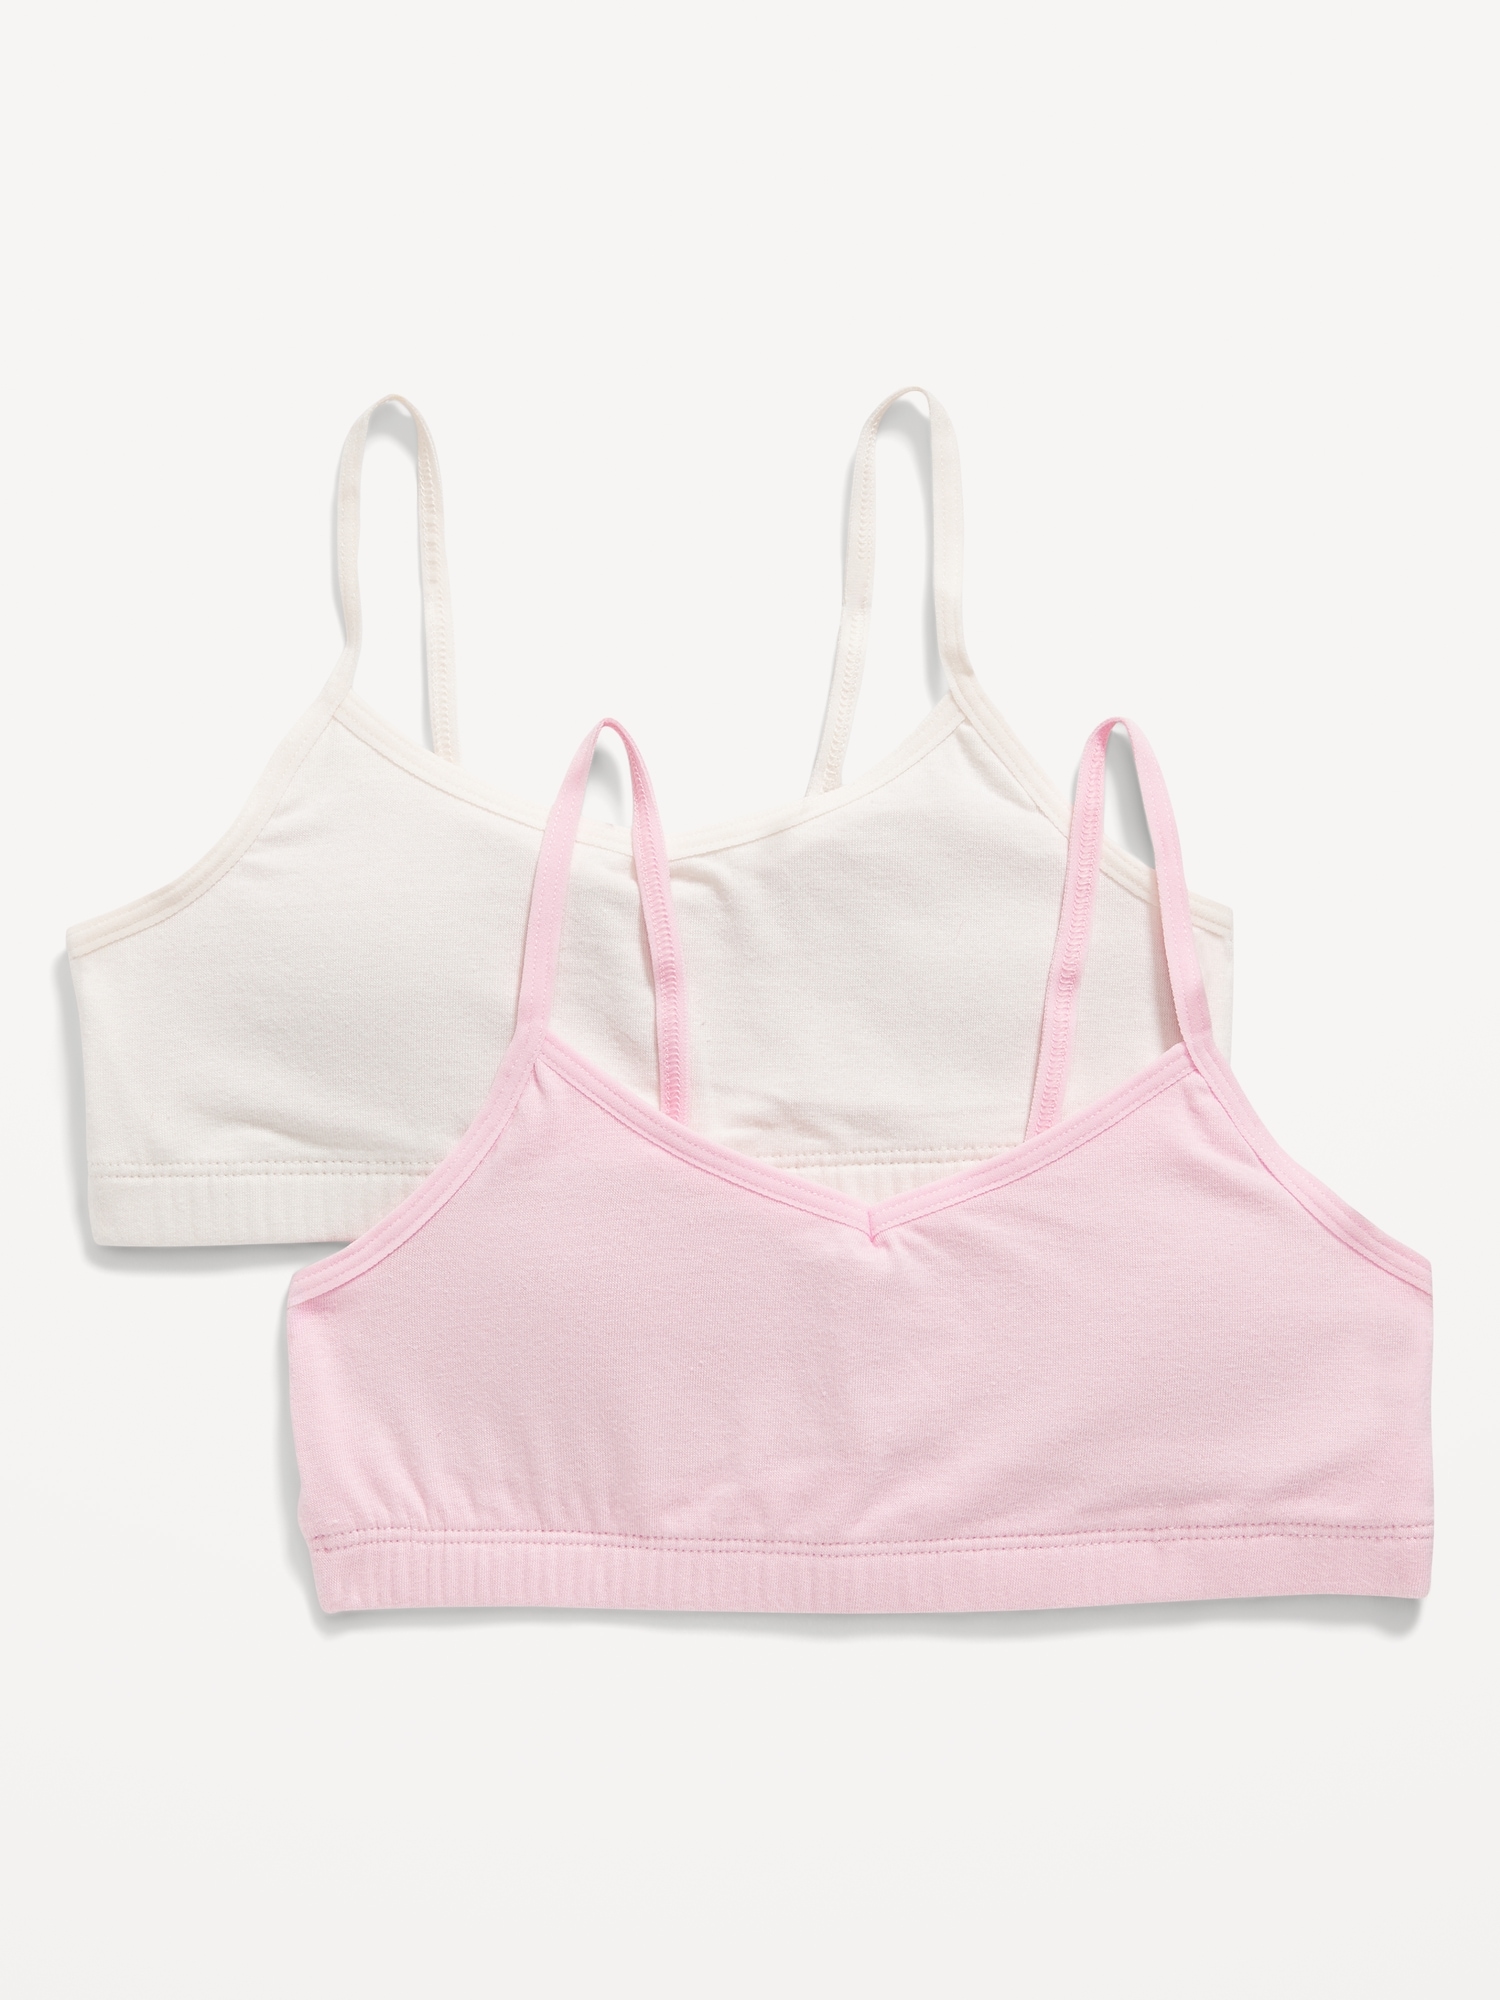 Bra top cami - 10 products